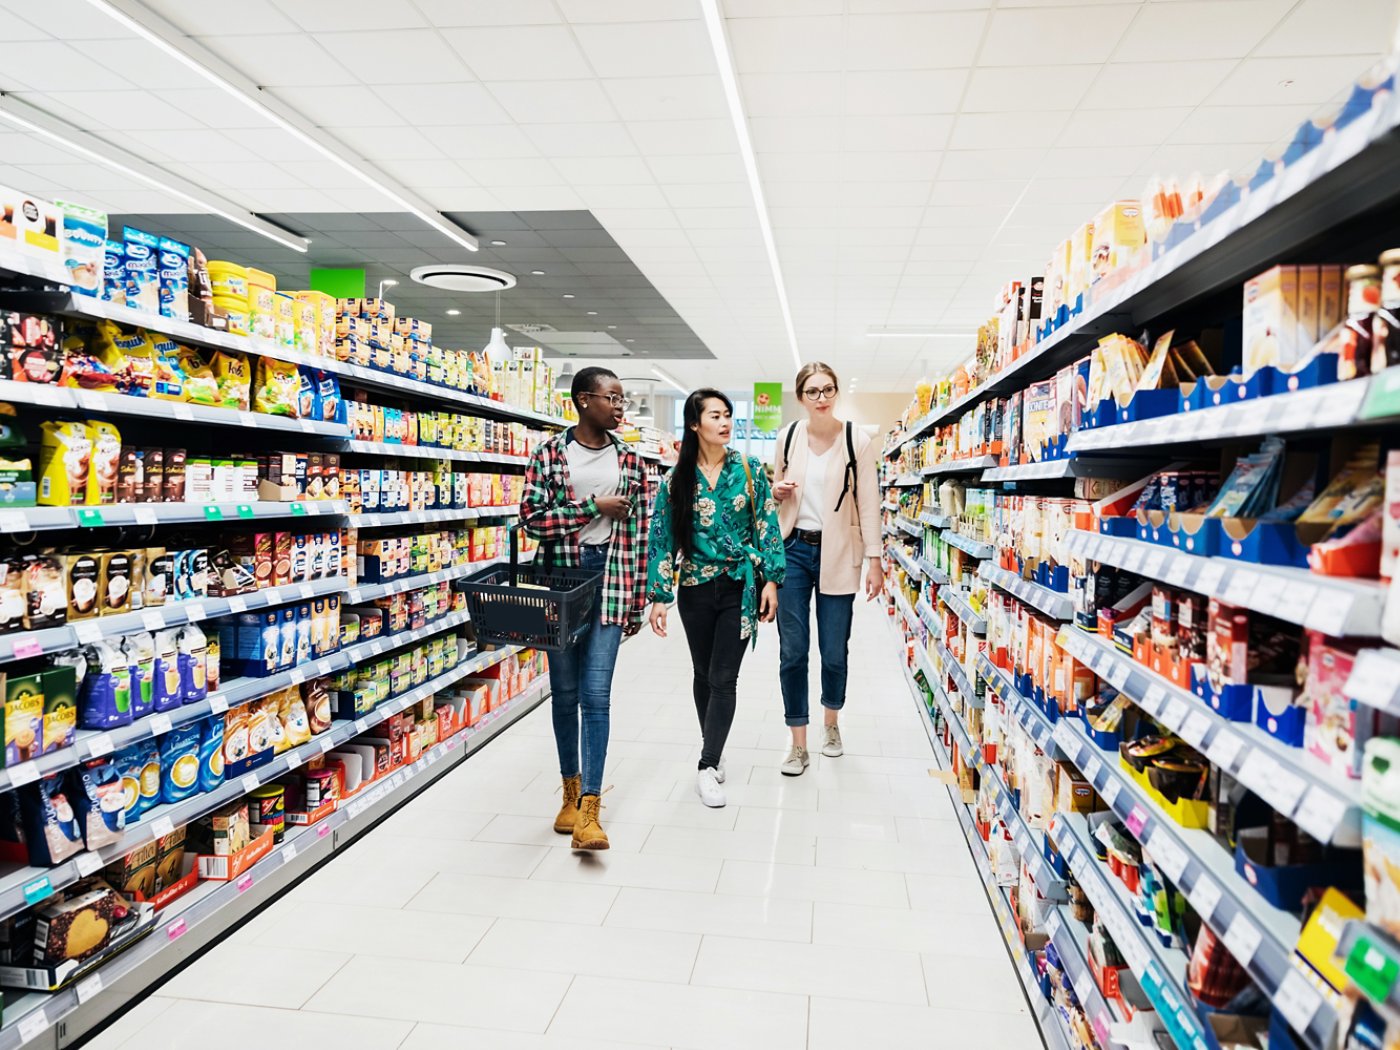 Three girls walking down an isle in the supermarket while out together shopping for food.